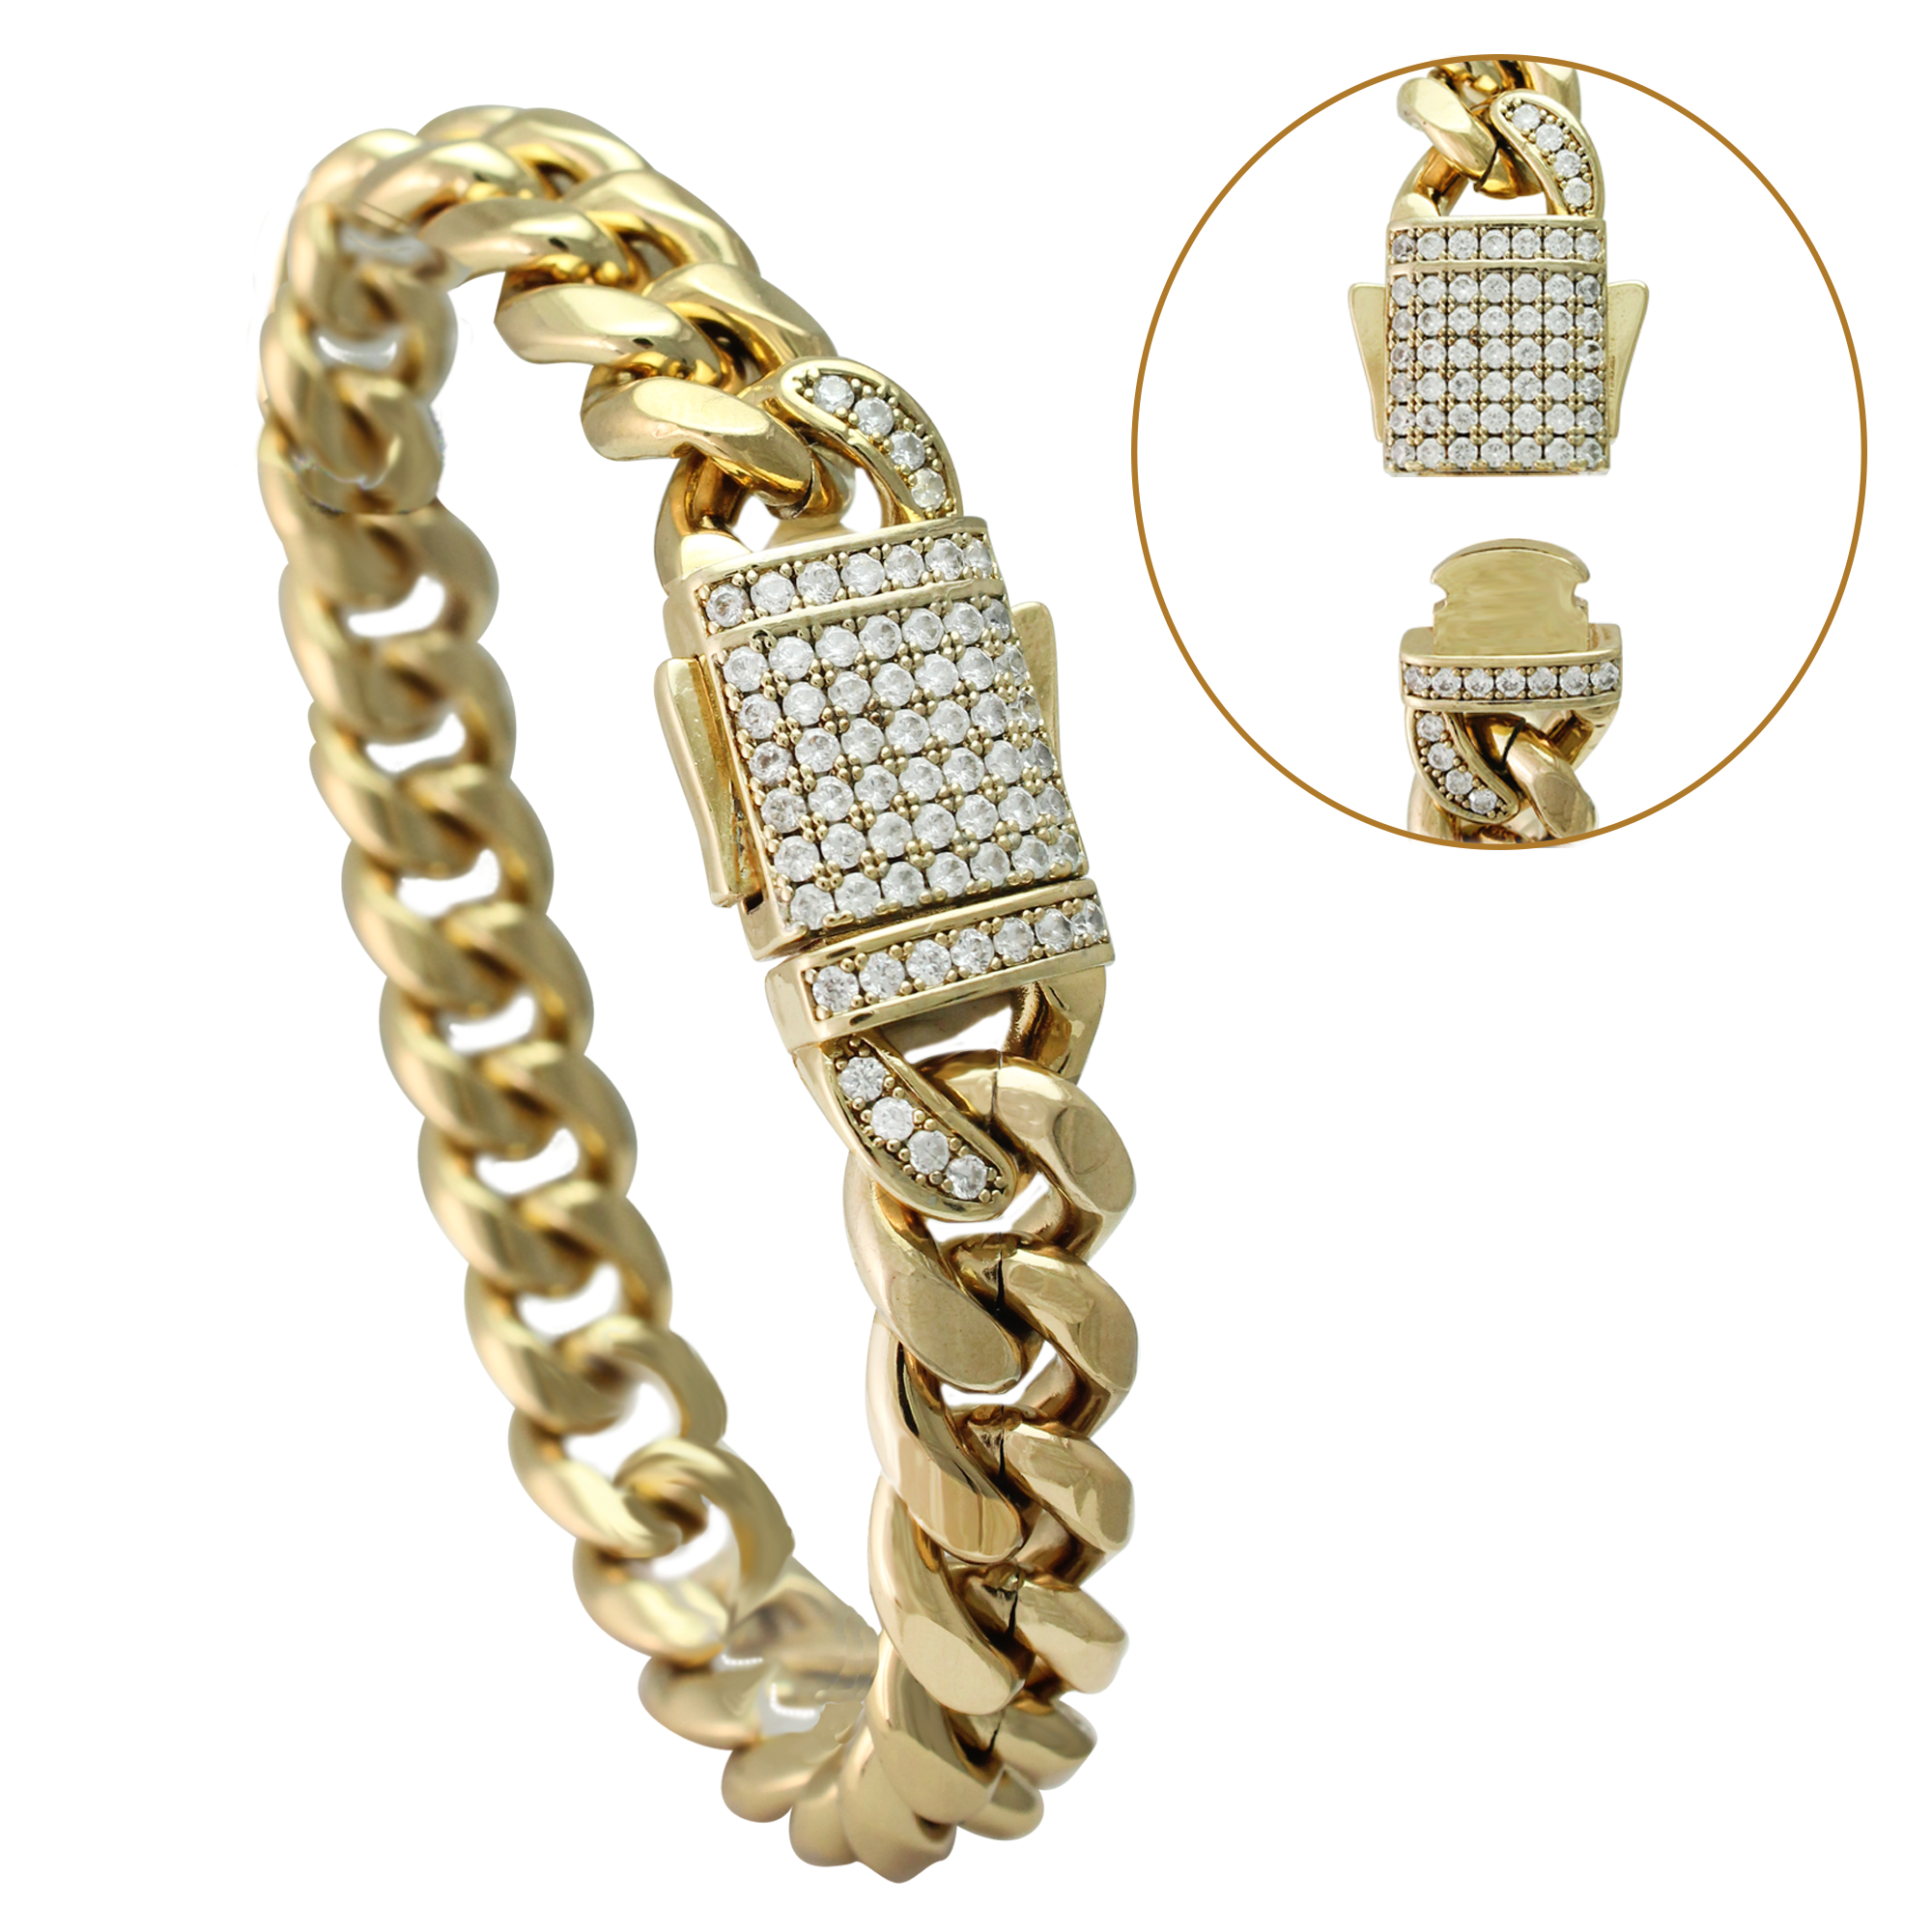 Stainless Steel Gold PVD Cuban Link Bracelet with CZ Stones